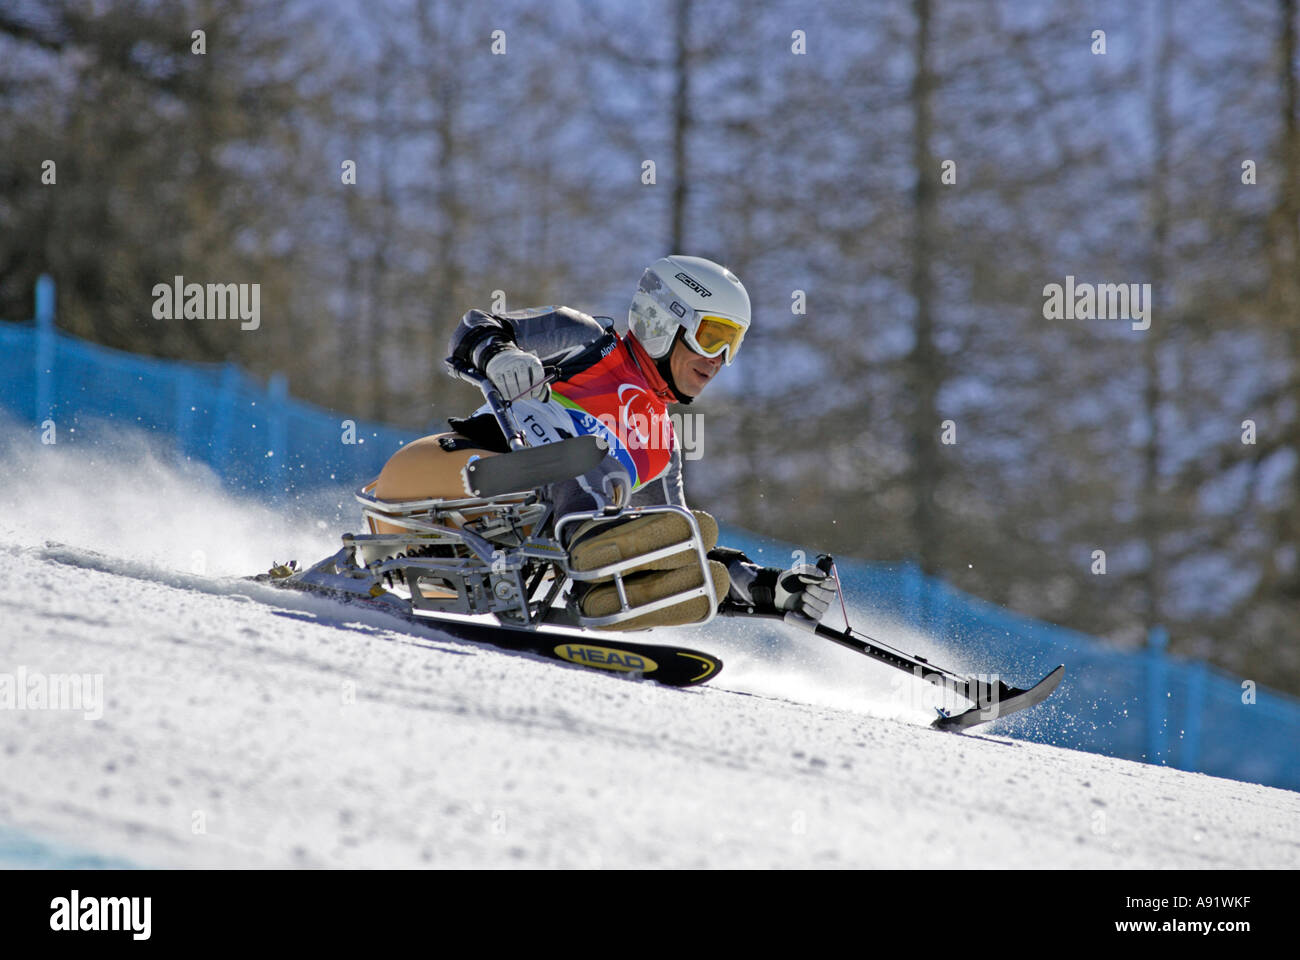 Akira Taniguchi LW11 of Japan in the Mens Alpine Skiing Super G Sitting competition Stock Photo